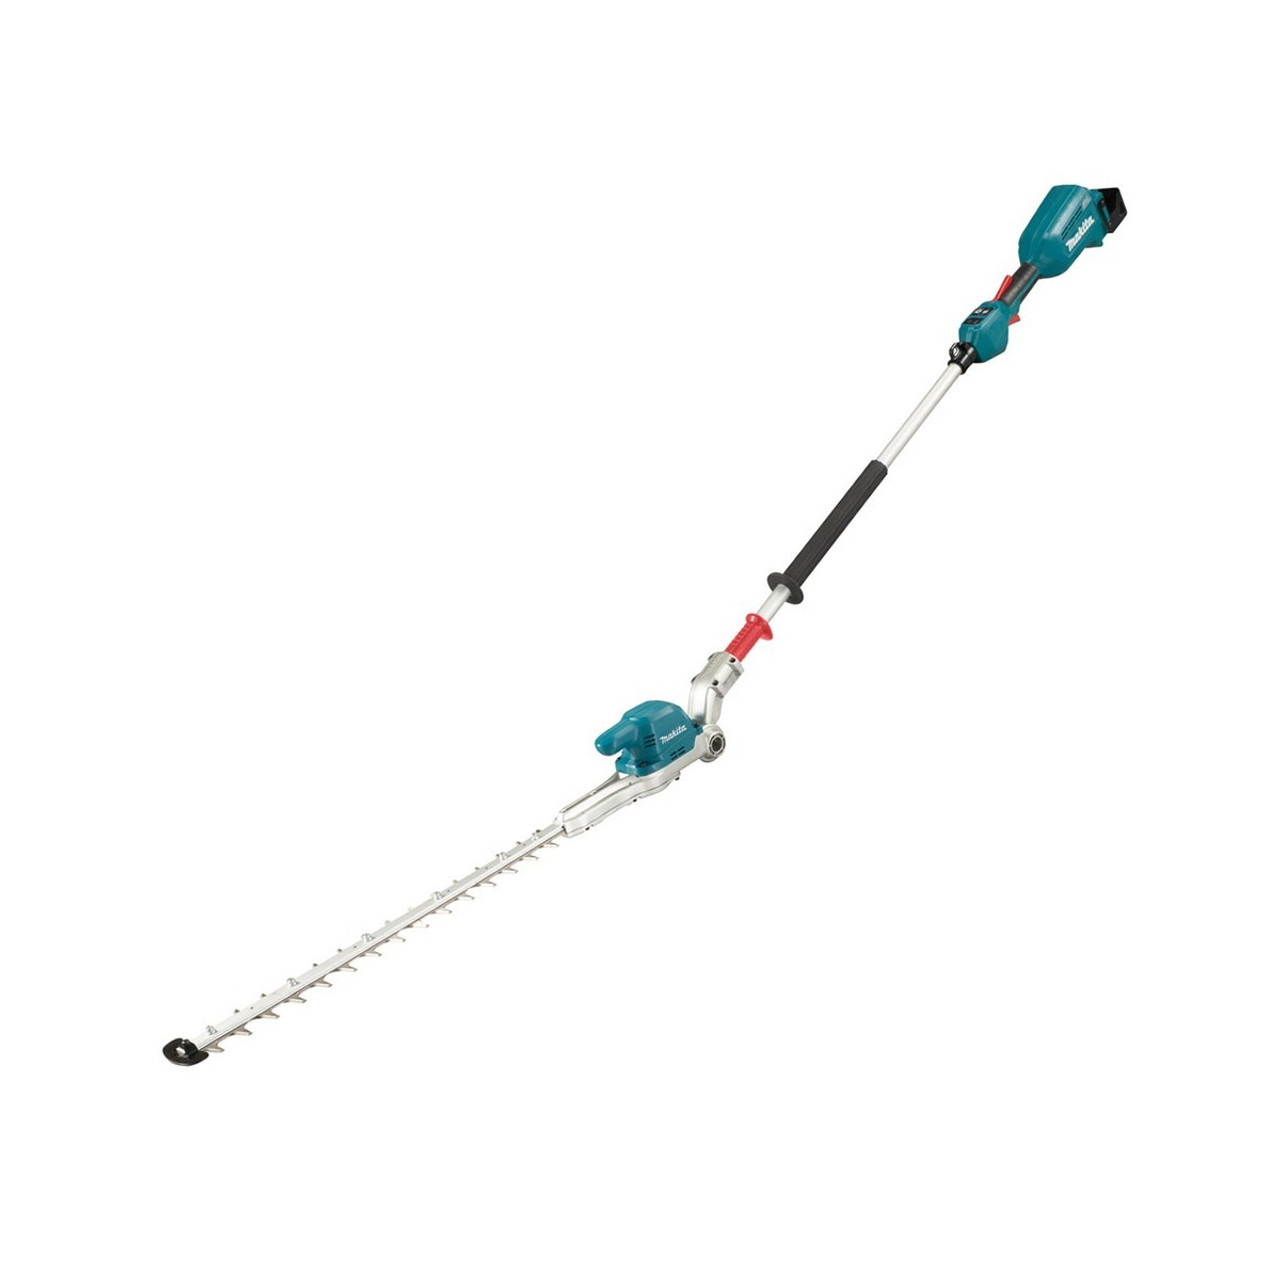 Makita 18V LXT Brushless Pole Hedge Trimmer (Body Only)